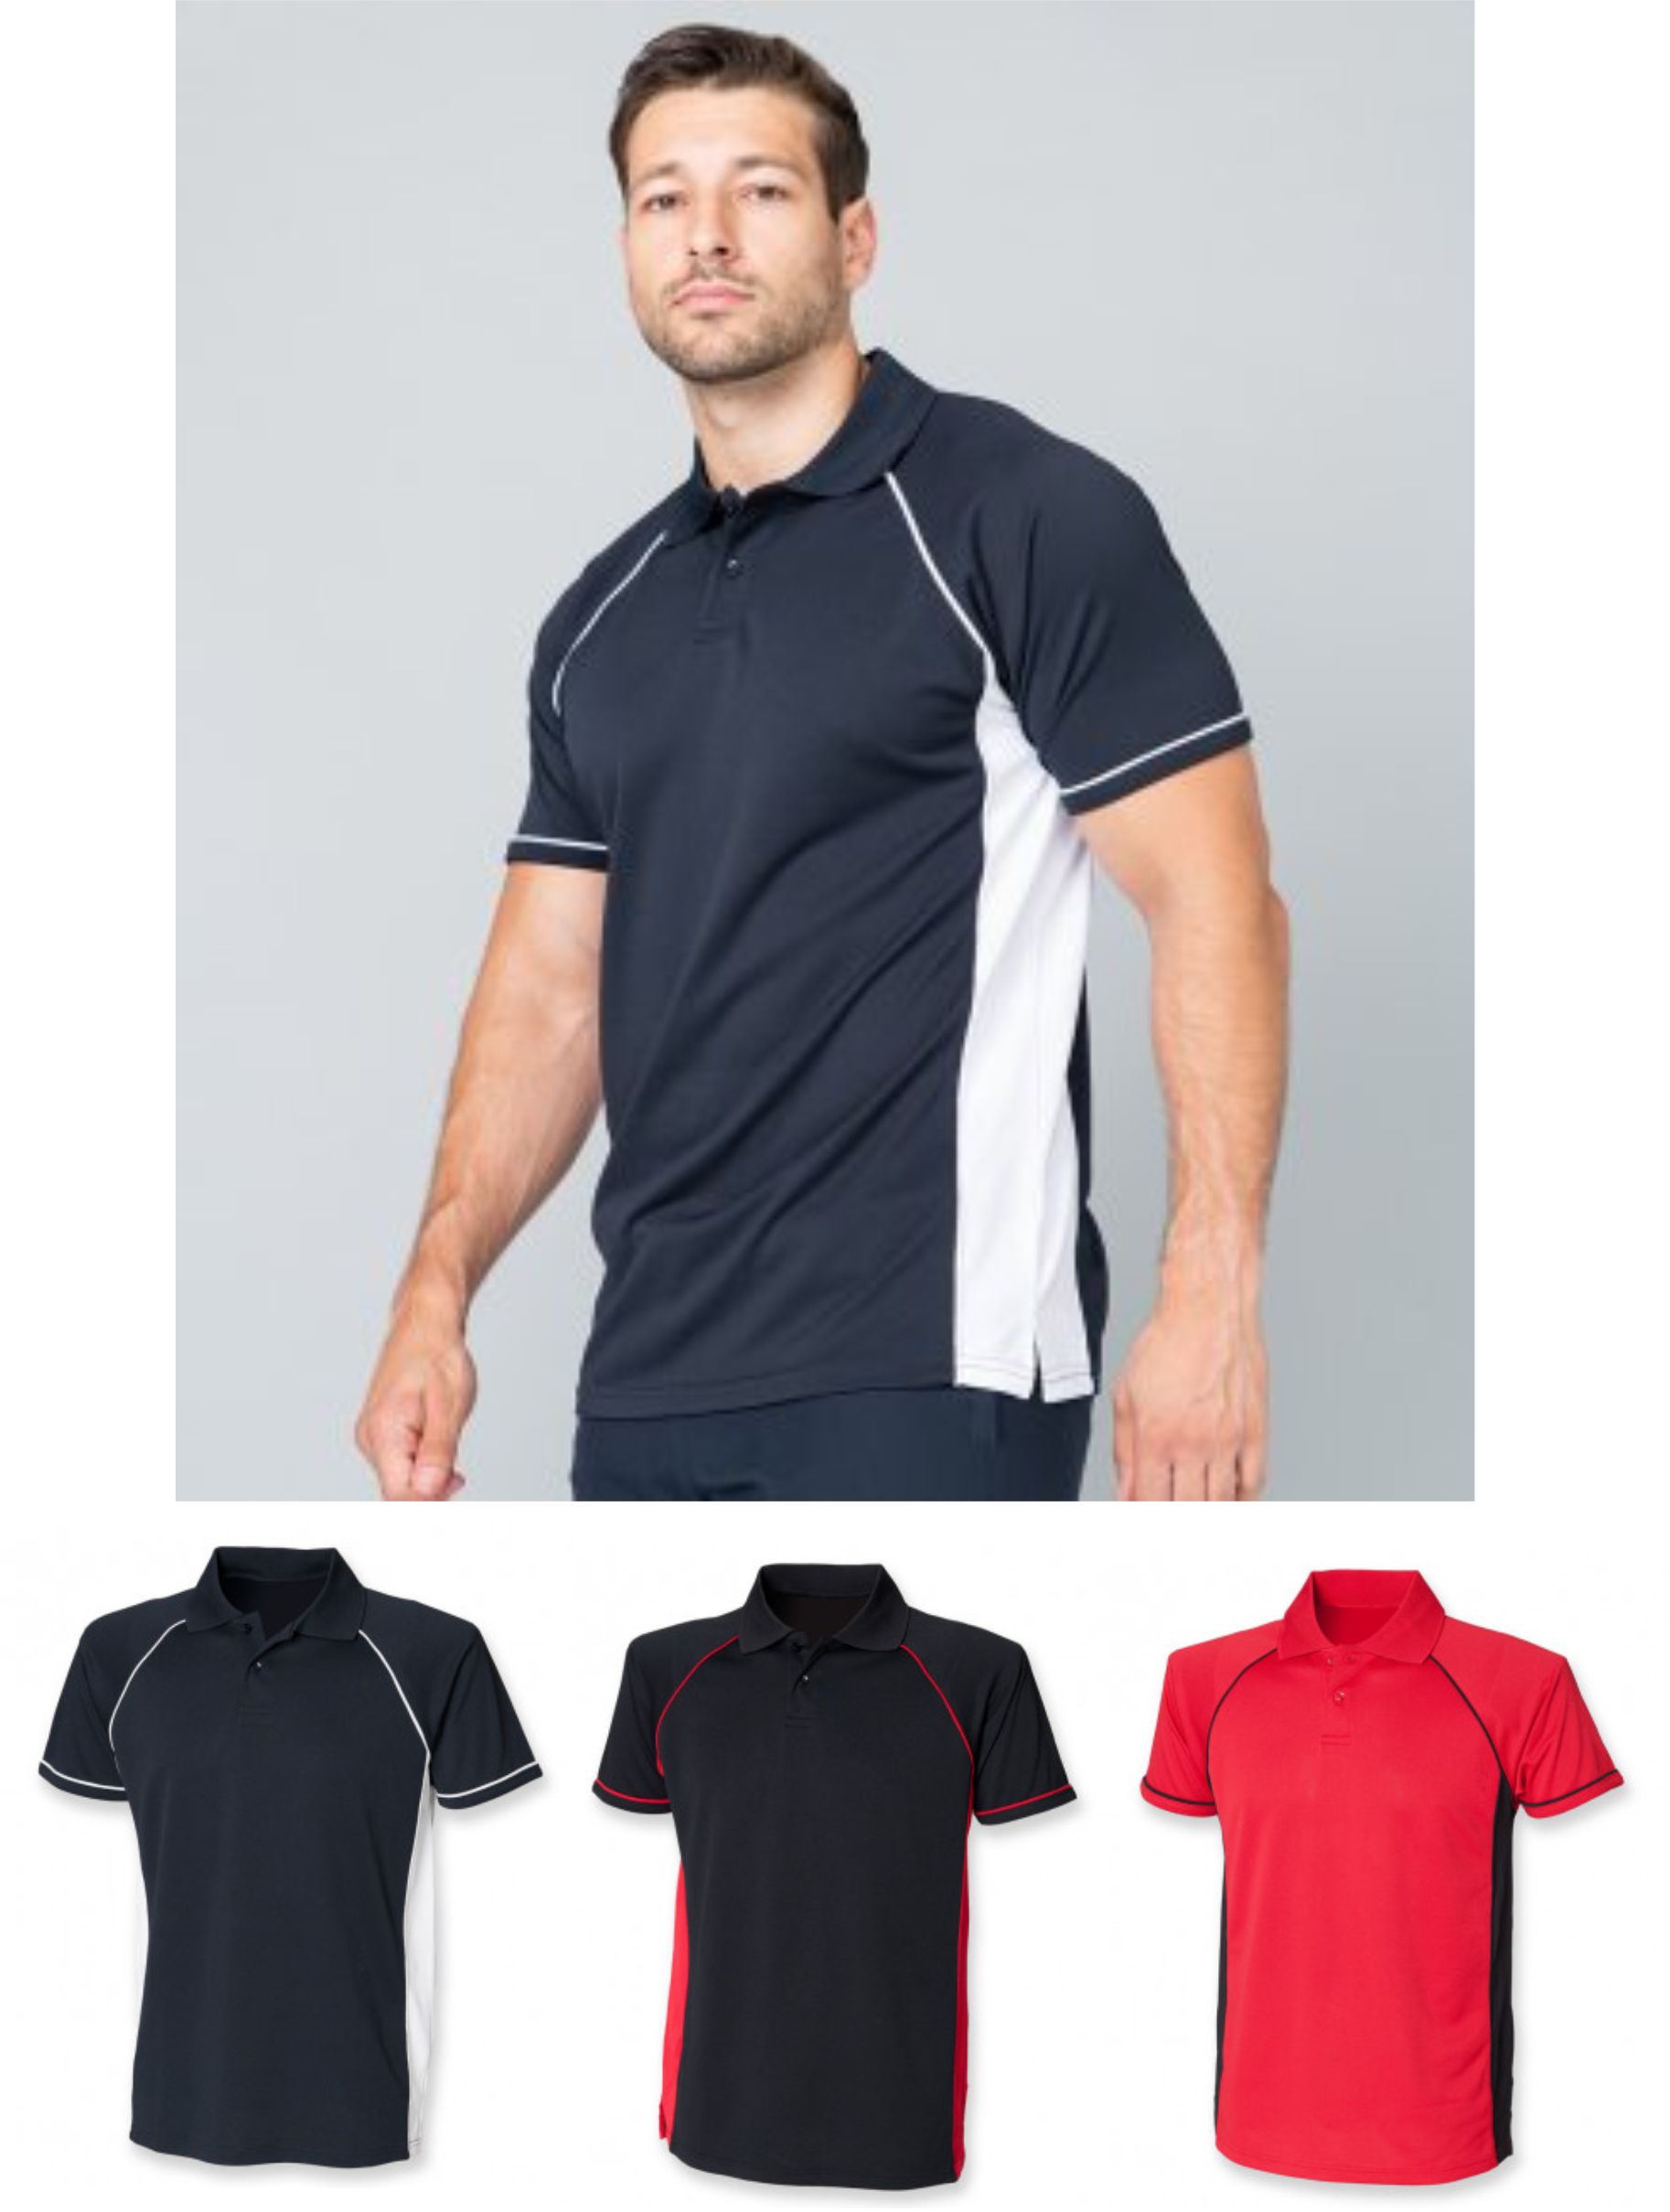 Finden & Hales LV310 Perfornance Polo Shirt